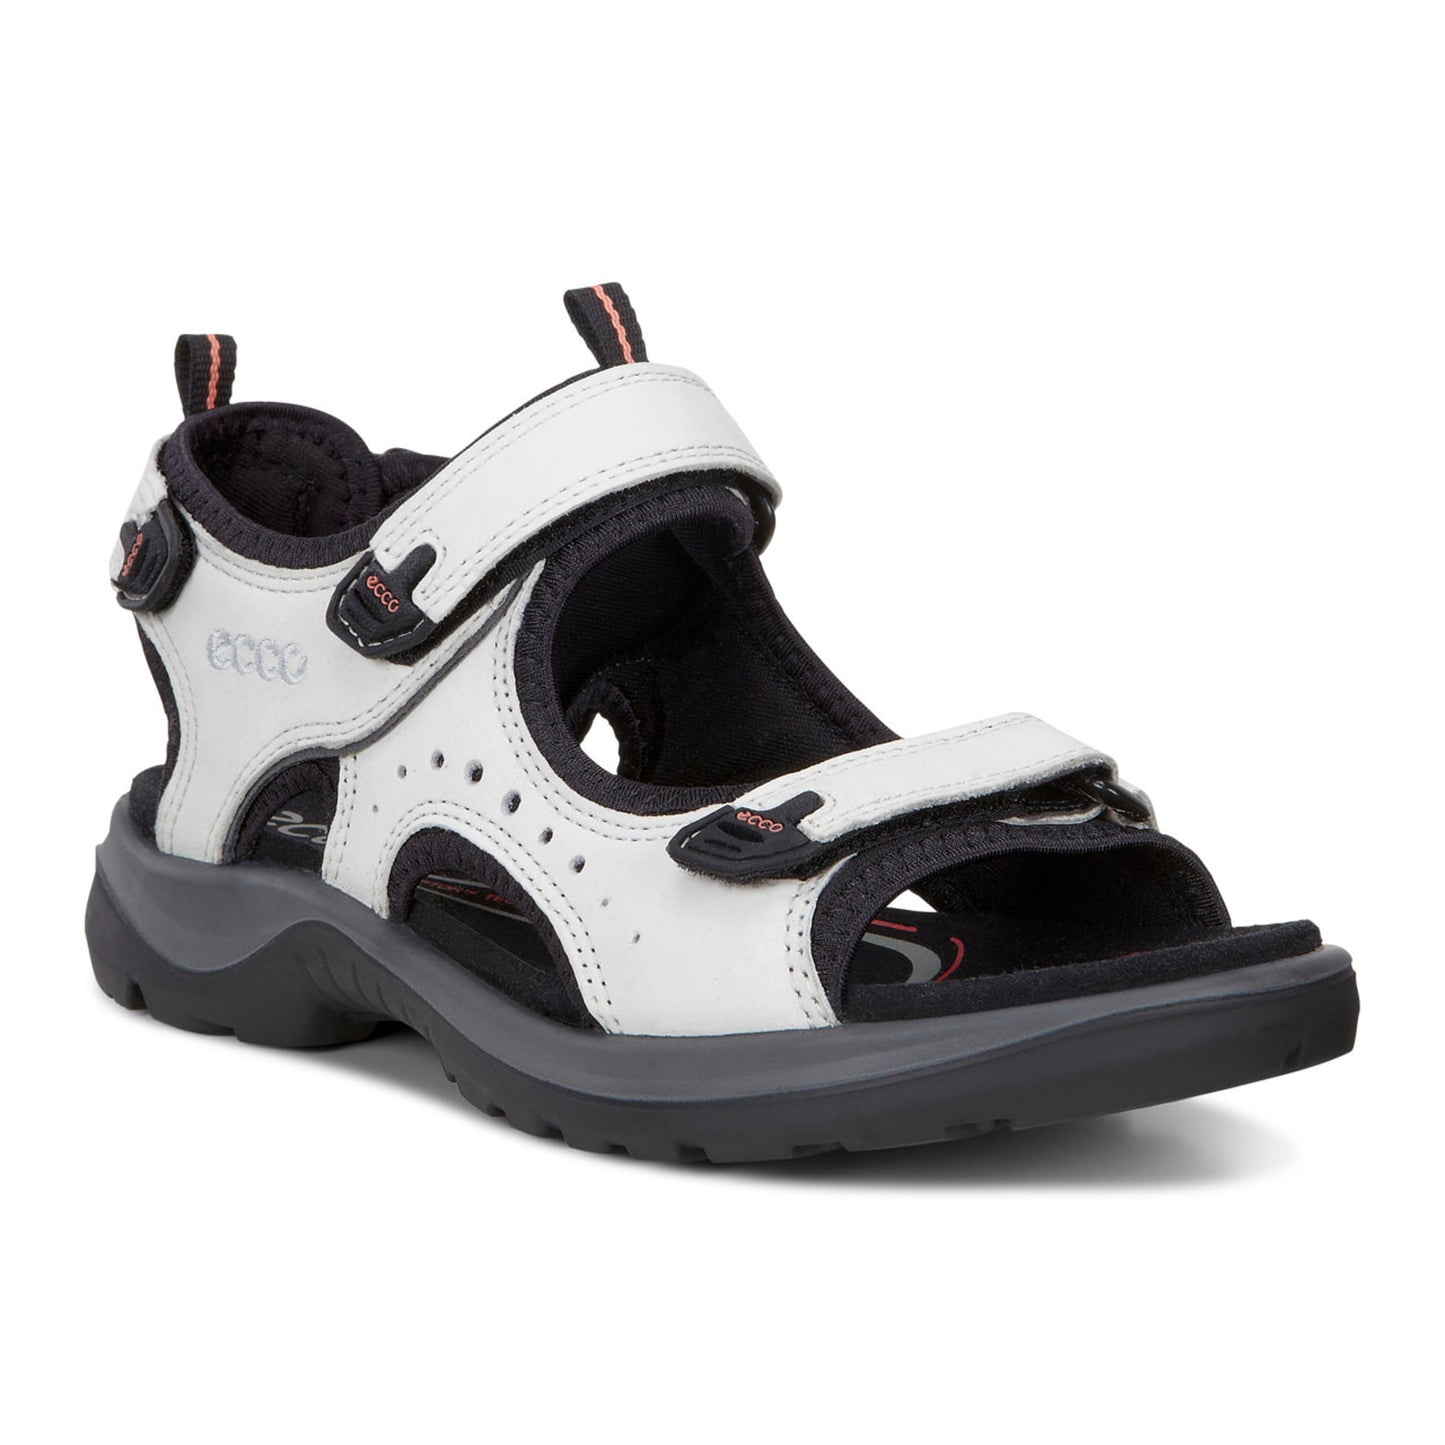 Ecco 822043 02152 Offroad Shadow White Sandals